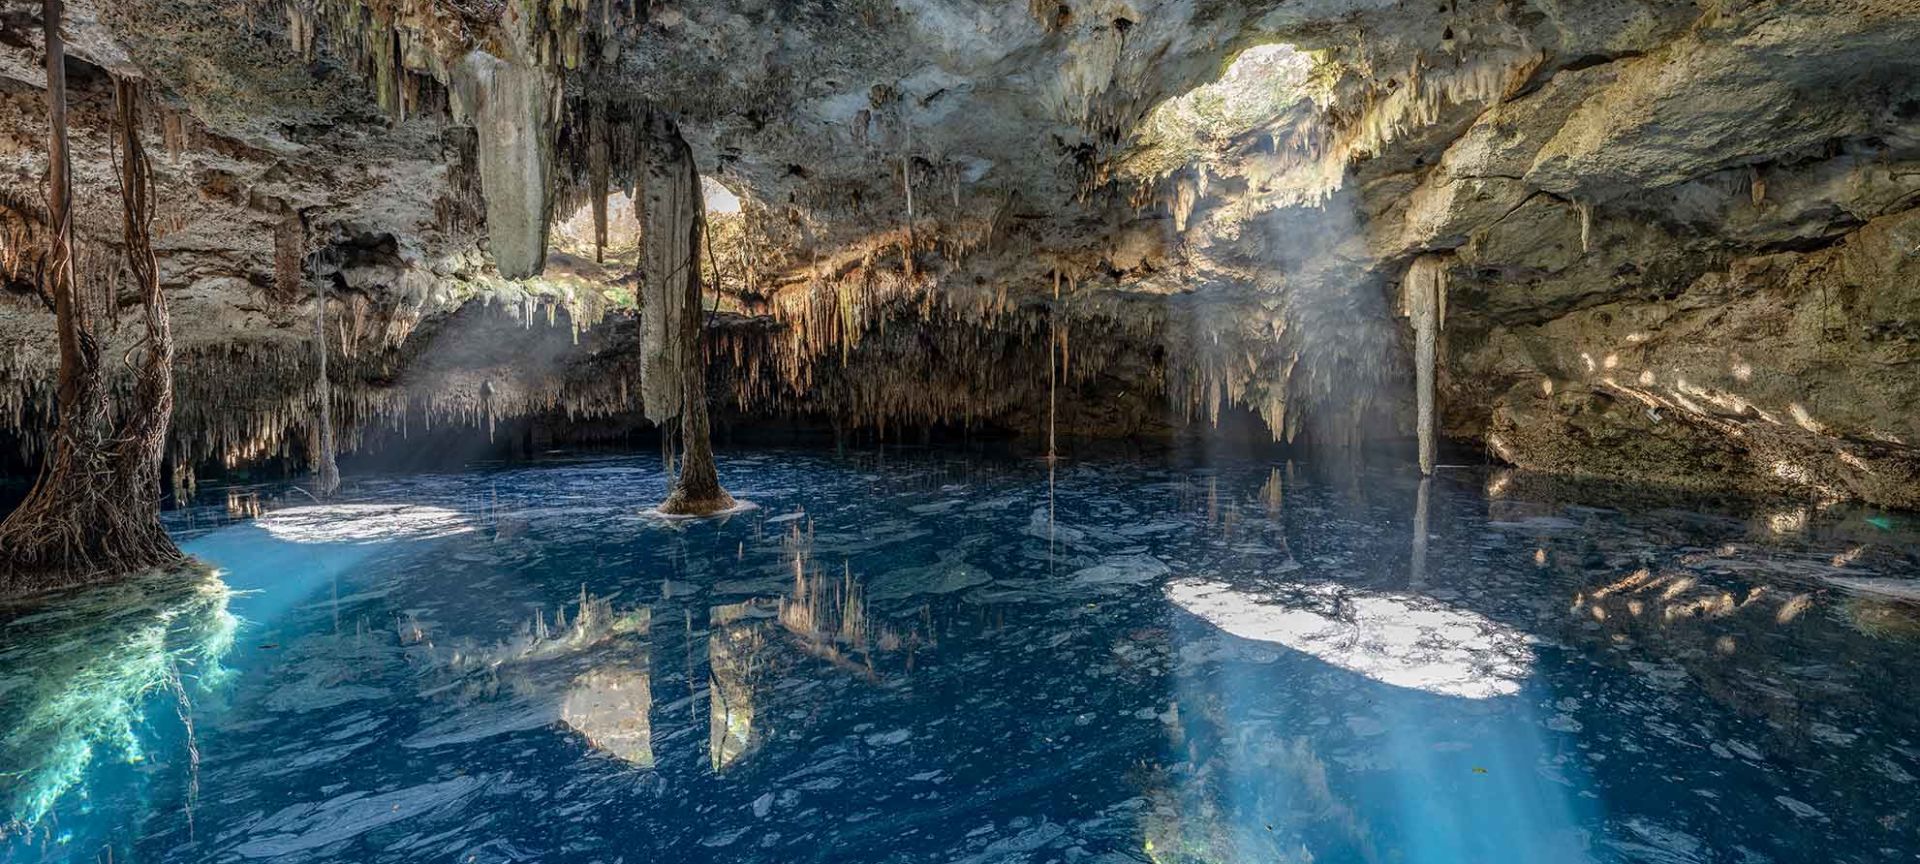 A Cave With Water In It